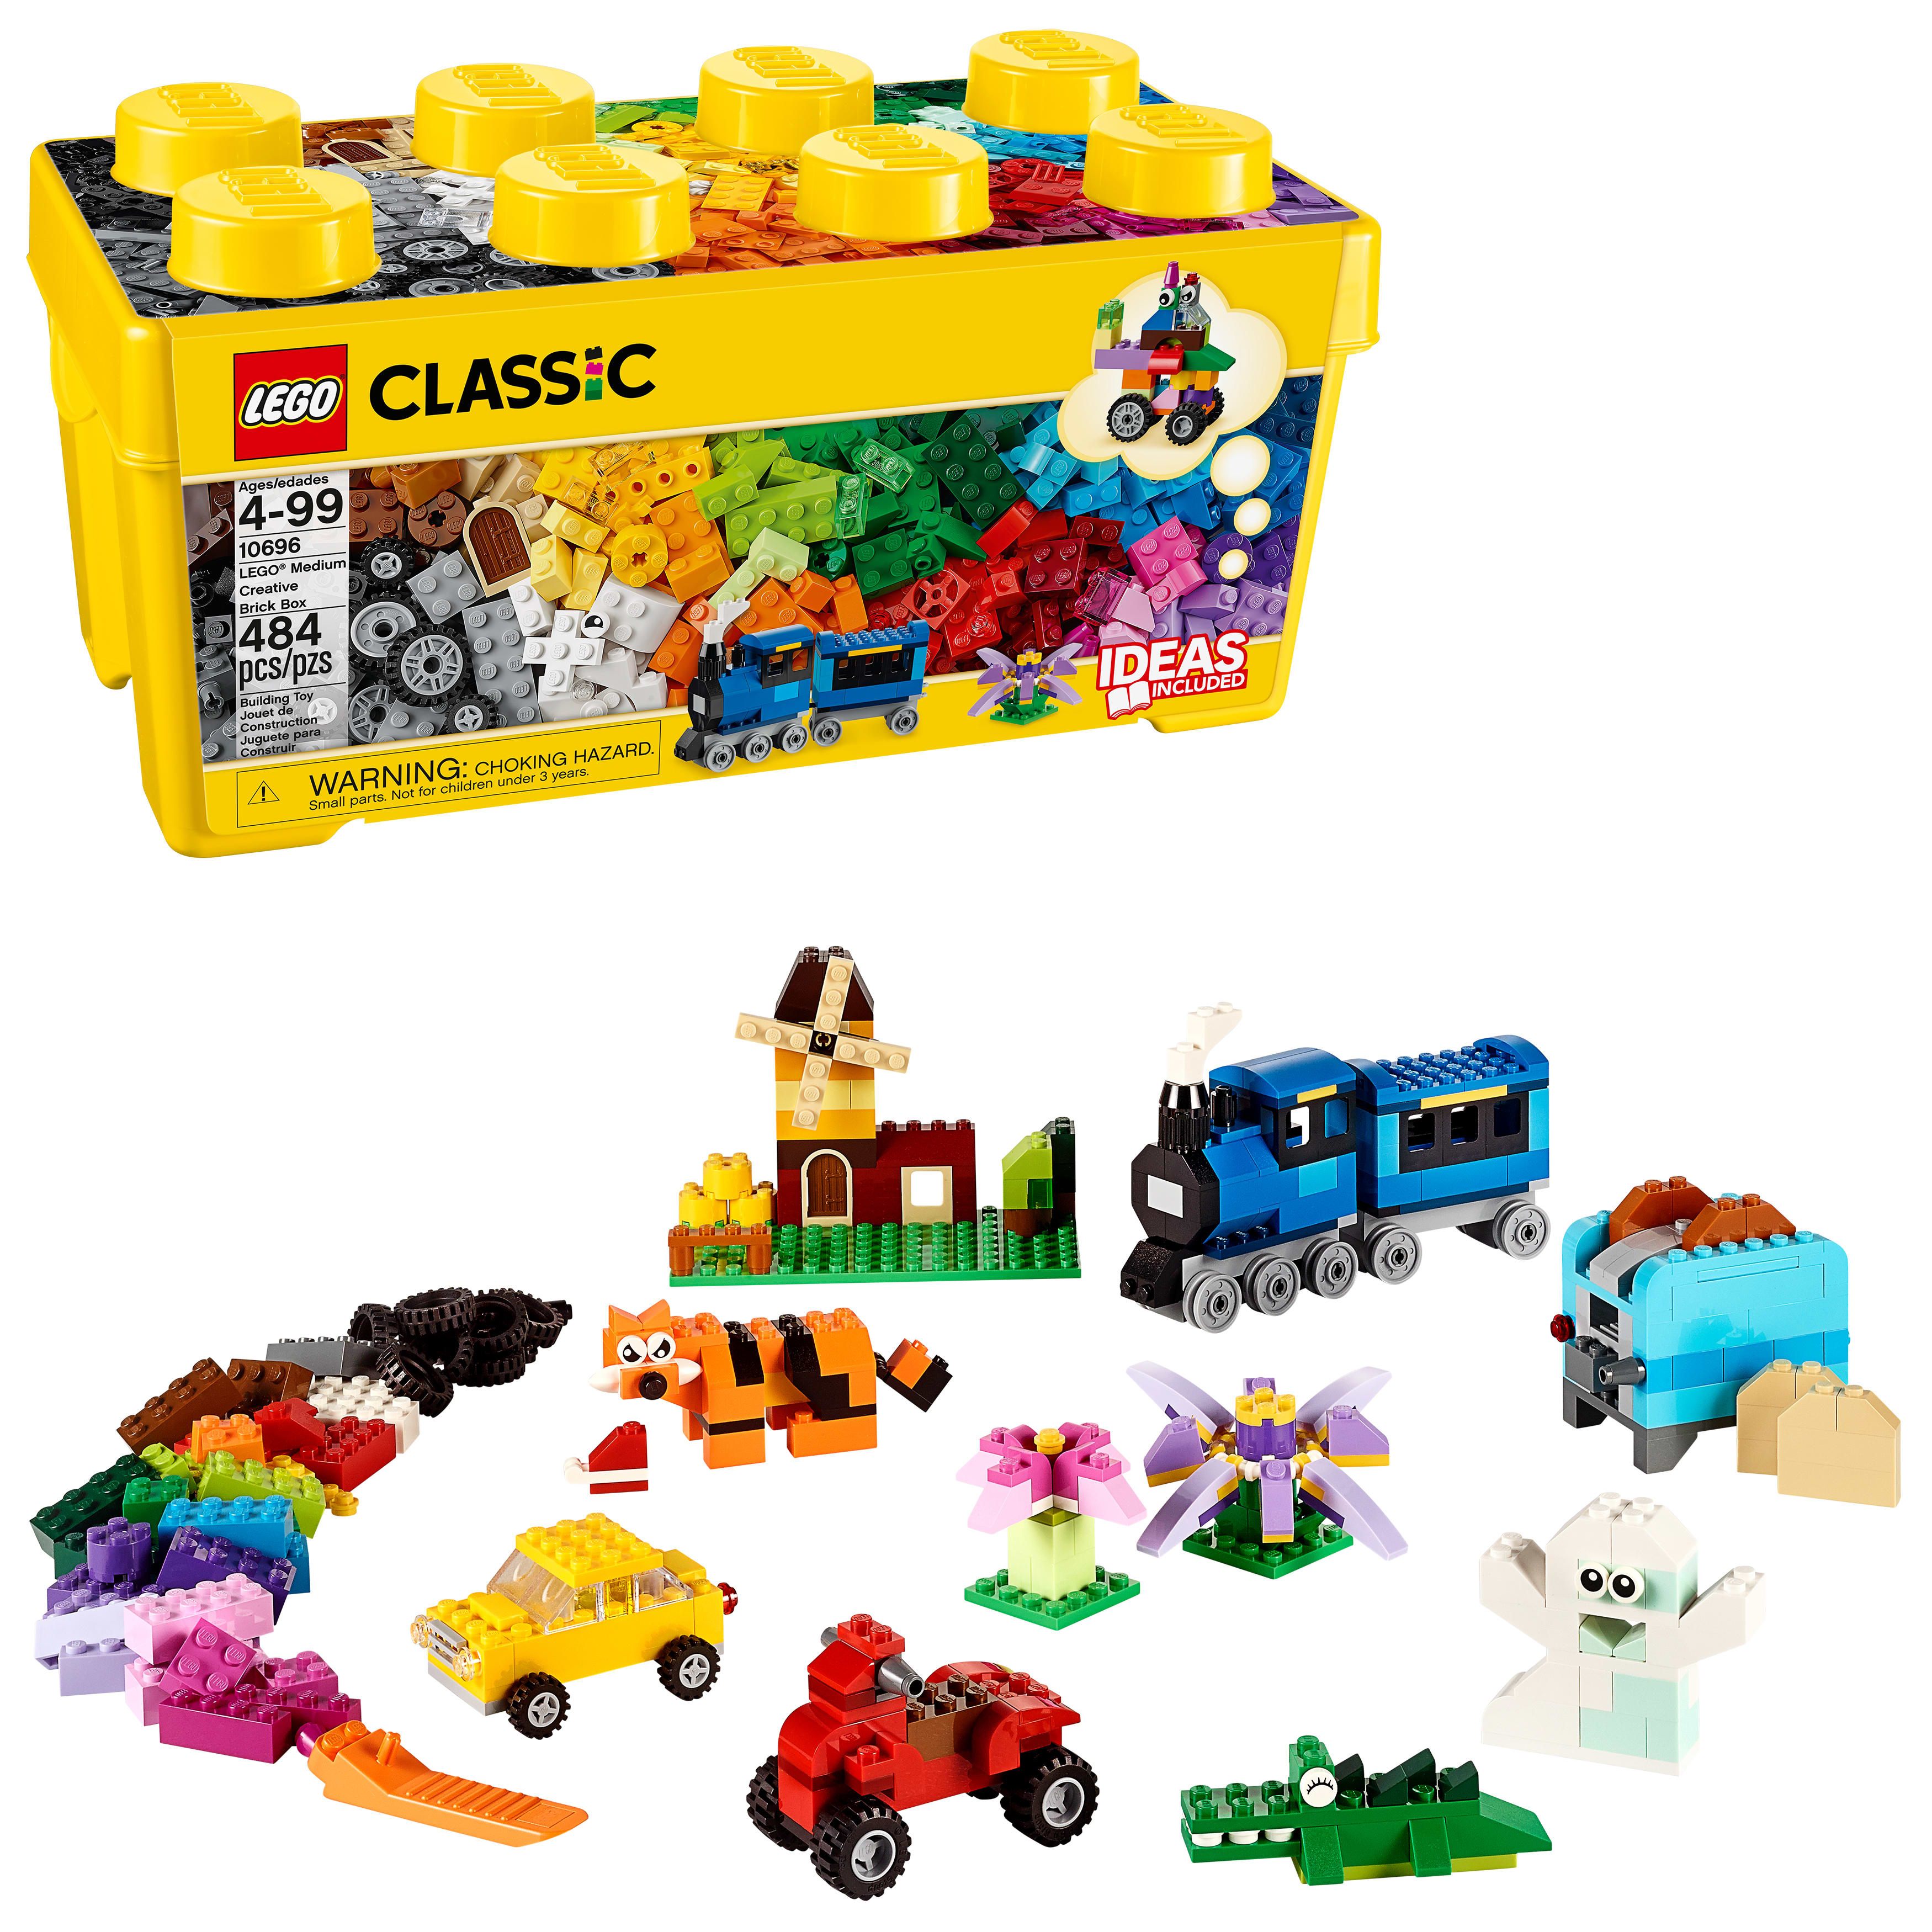 Best Classic Toys for Kids: Connect 4, Mr. Potato Head, LEGO